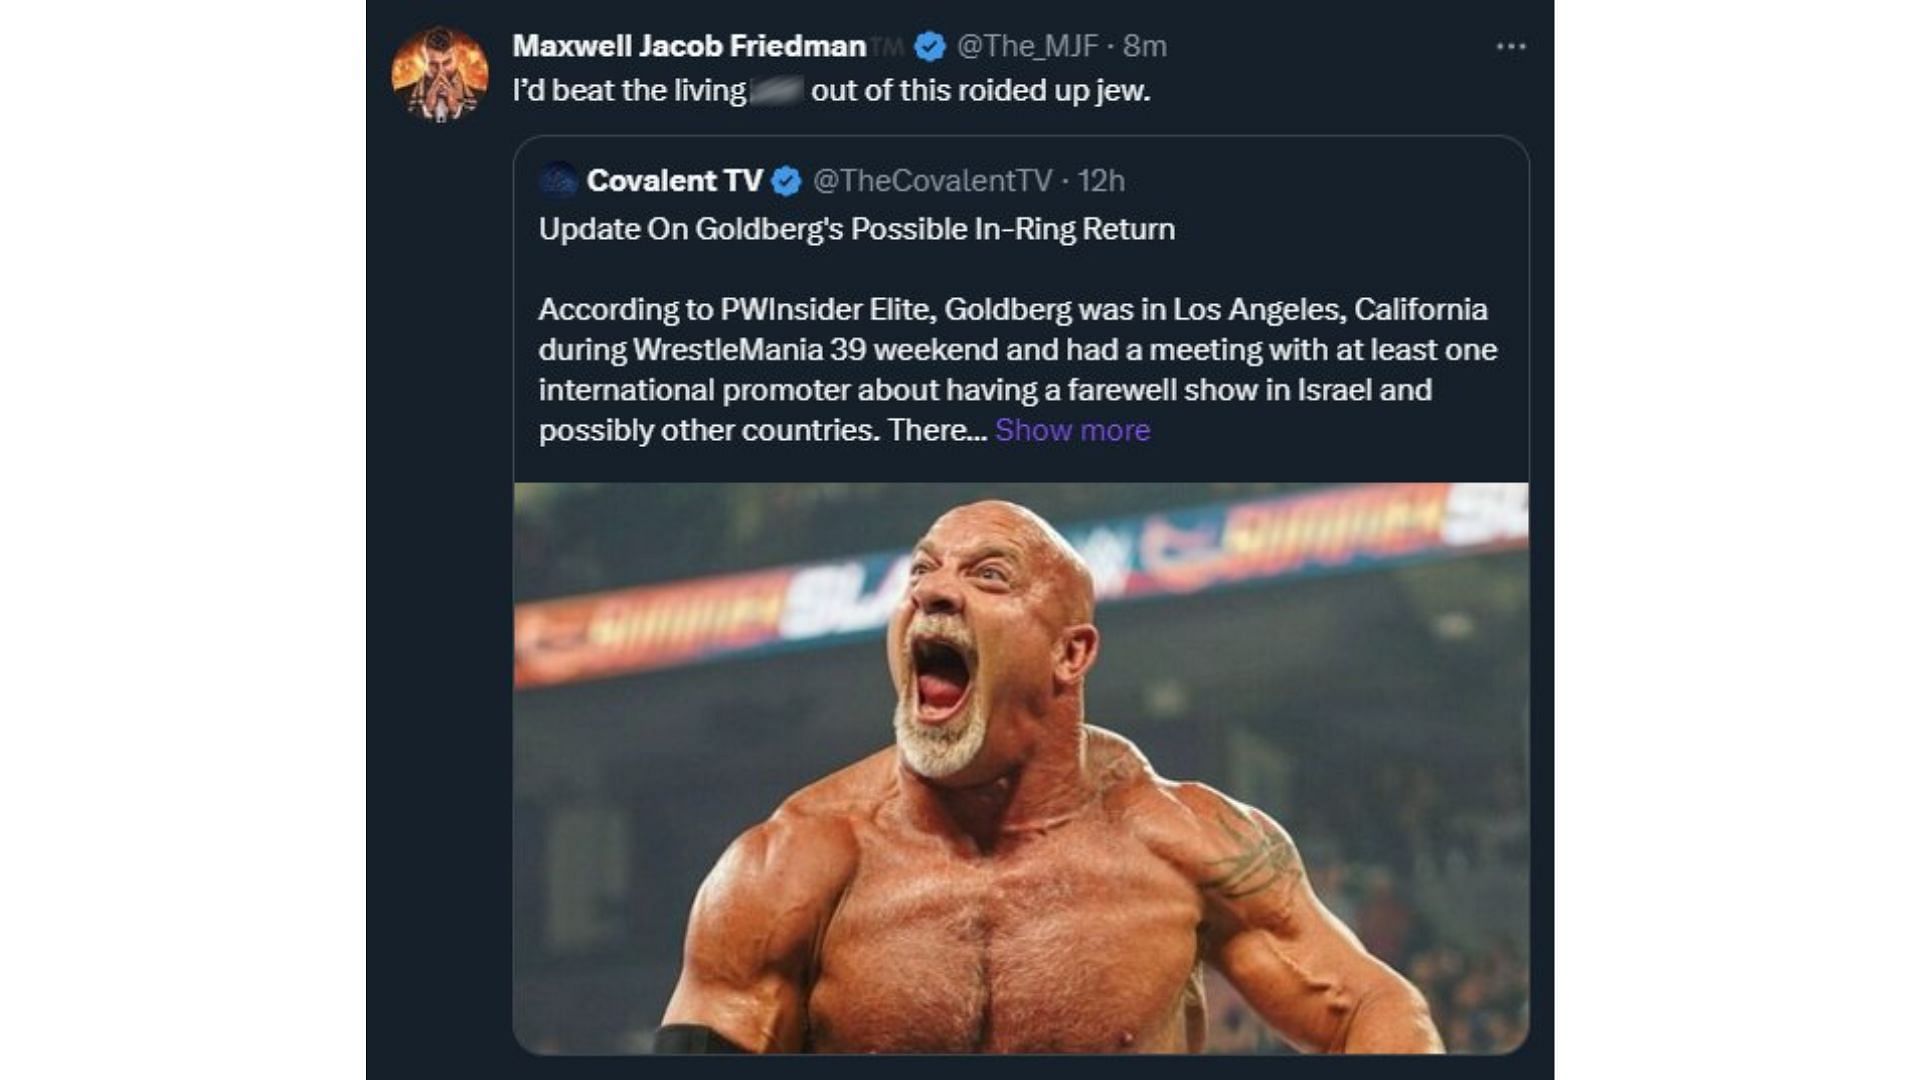 Friedman might have deleted the tweet, but fans luckily took screenshots beforehand.